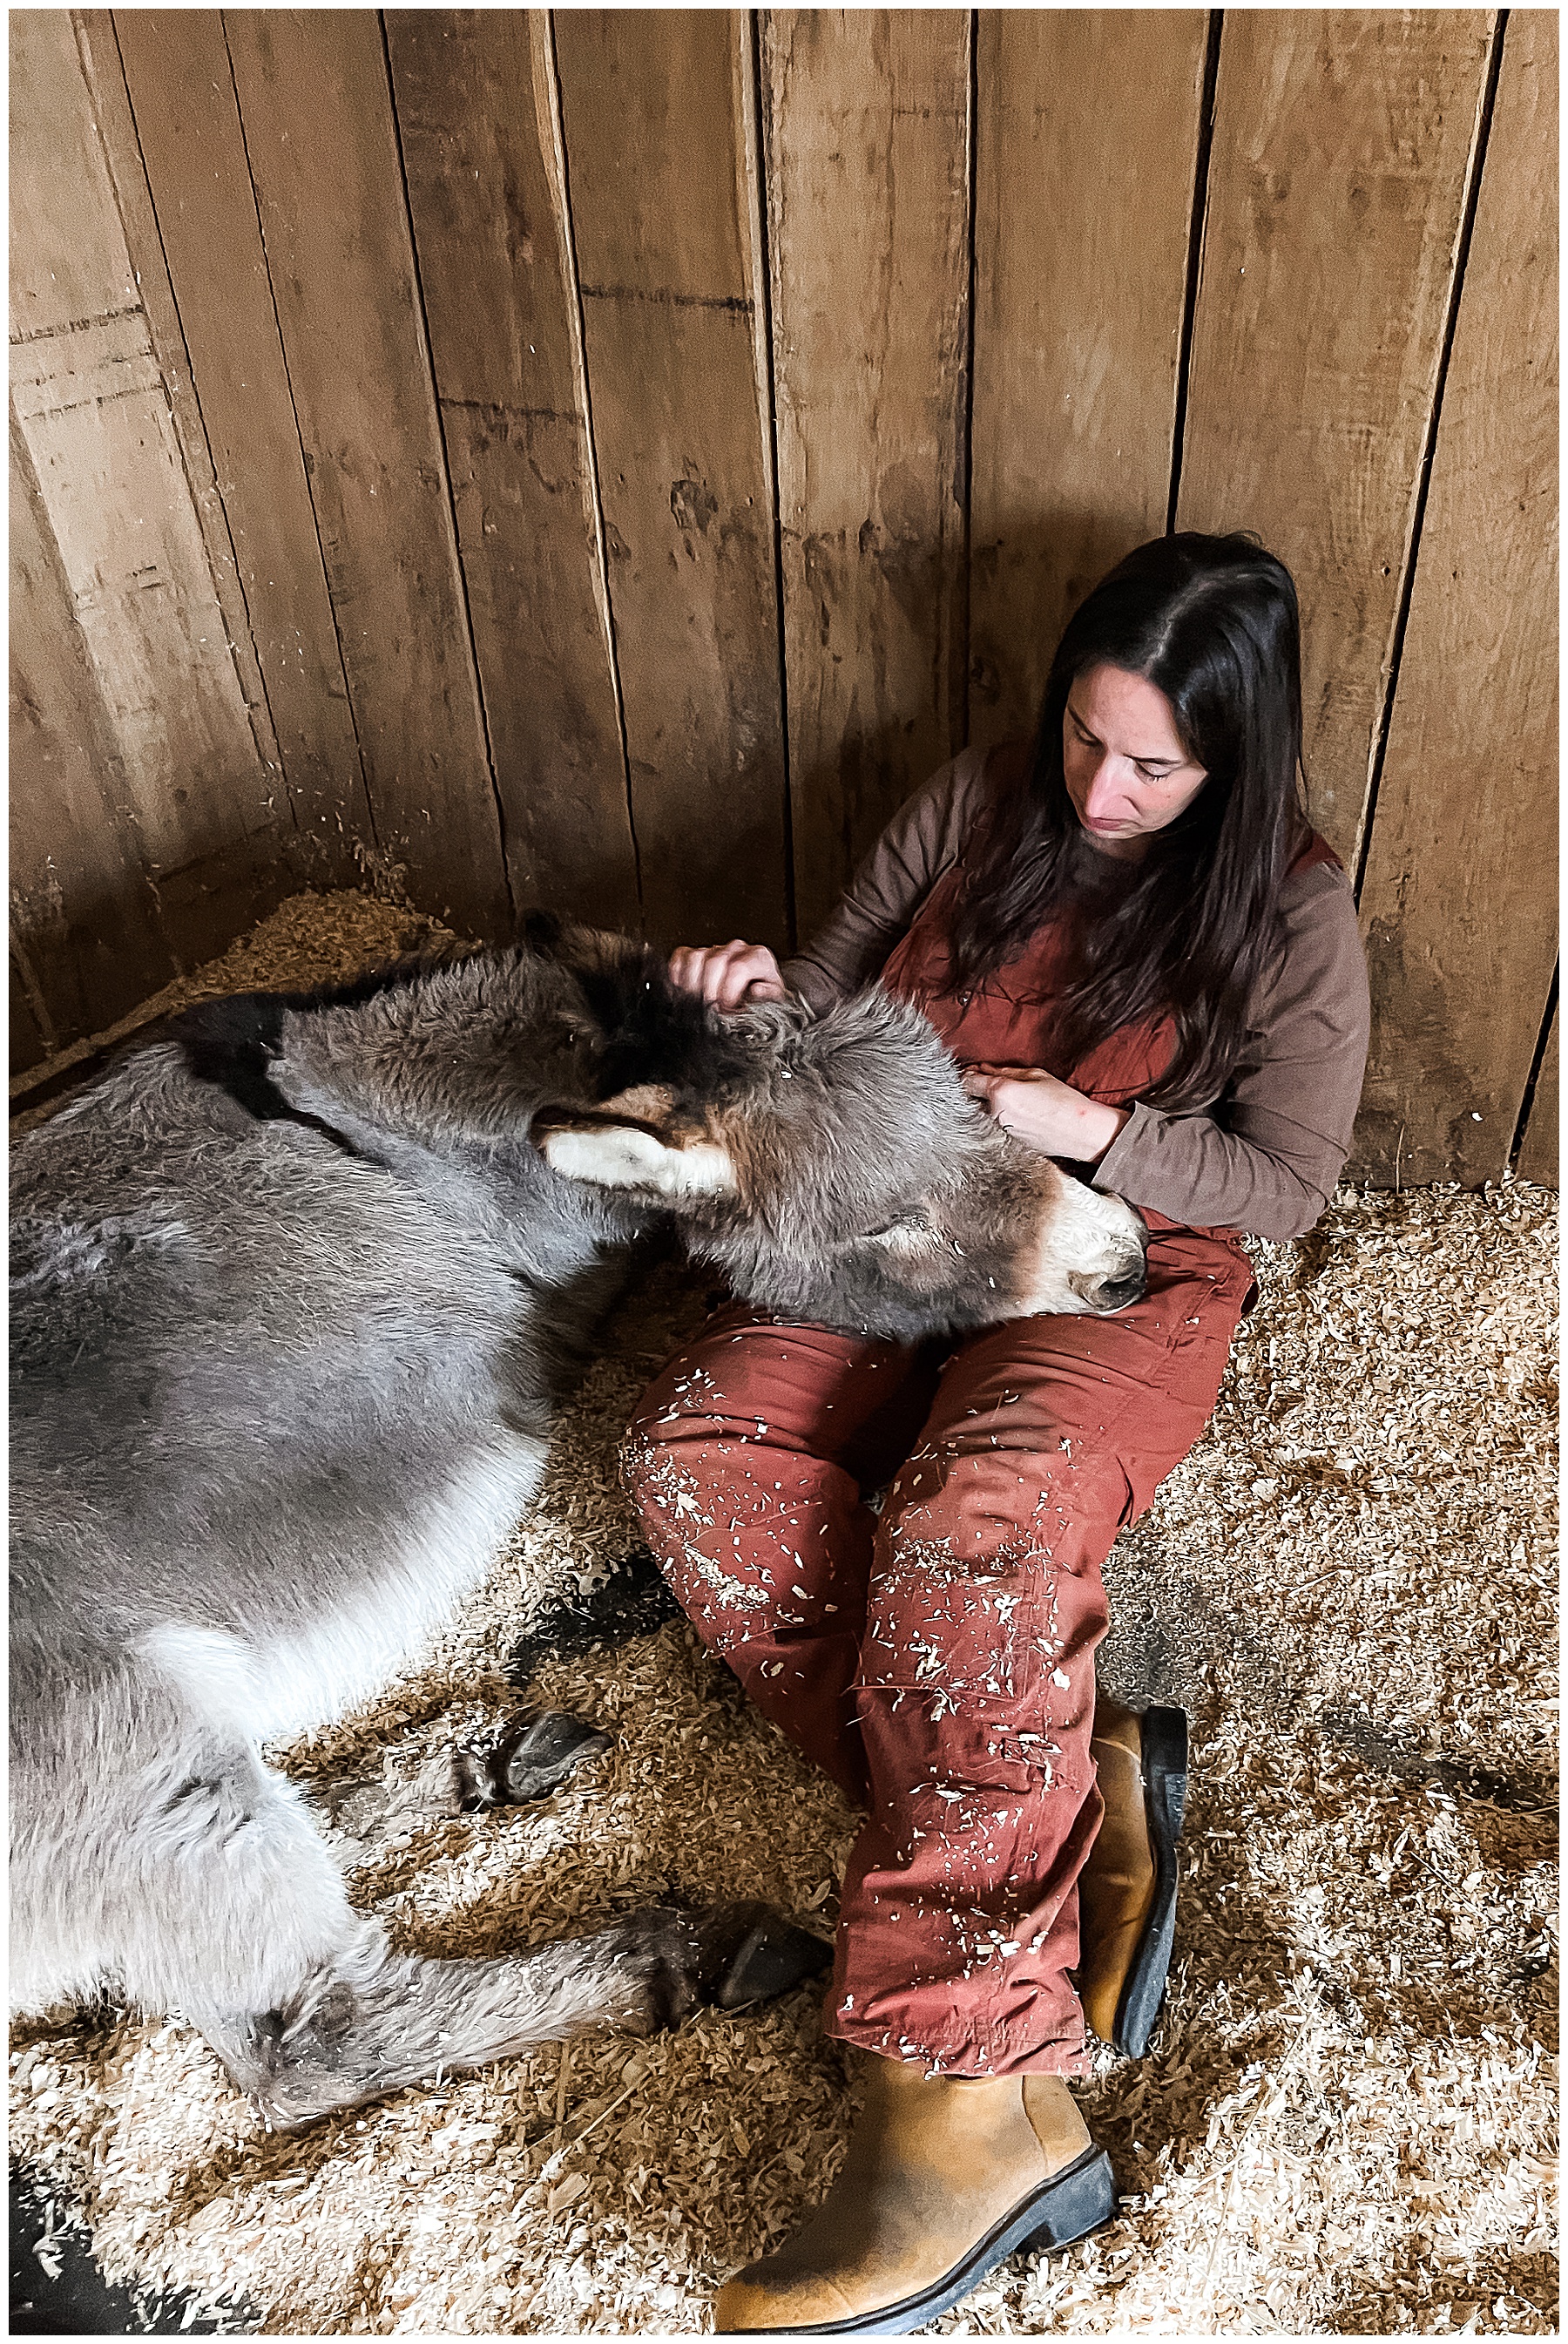 Donkey with colic. Naomi's last day. Sugar Maple Weekly Updates